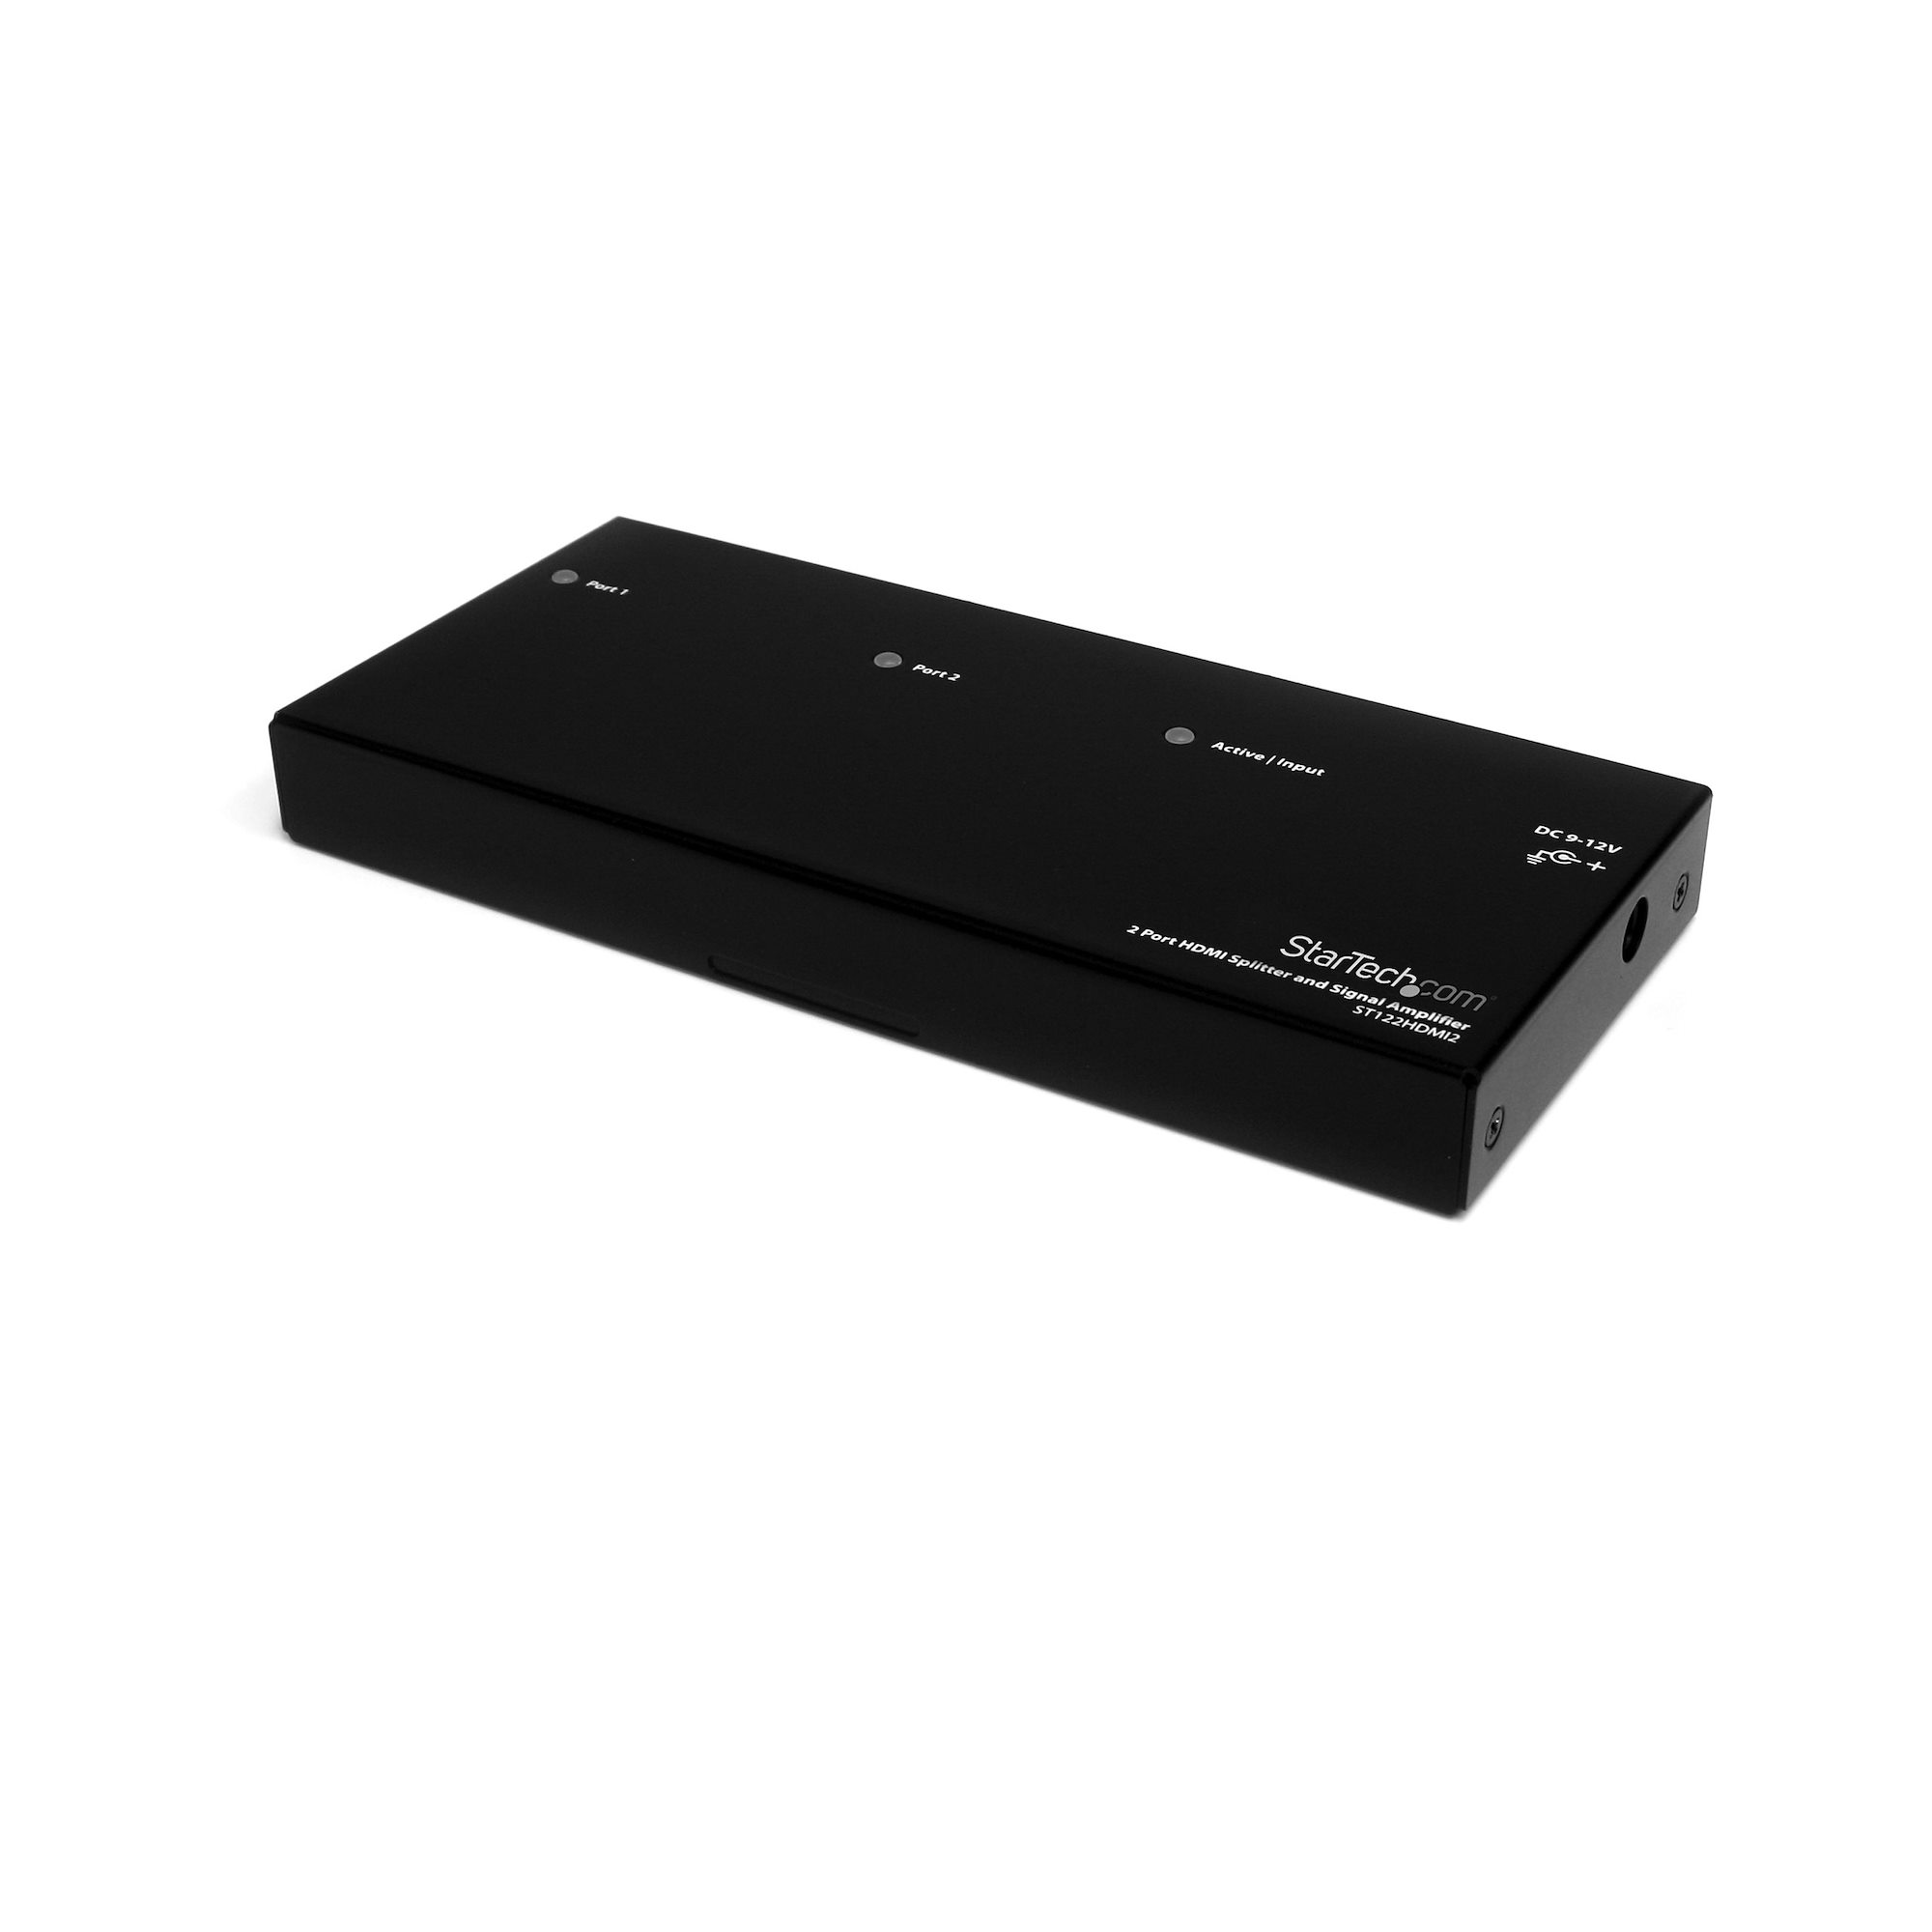 https://media.startech.com/cms/products/gallery_large/st122hdmi2.main.jpg